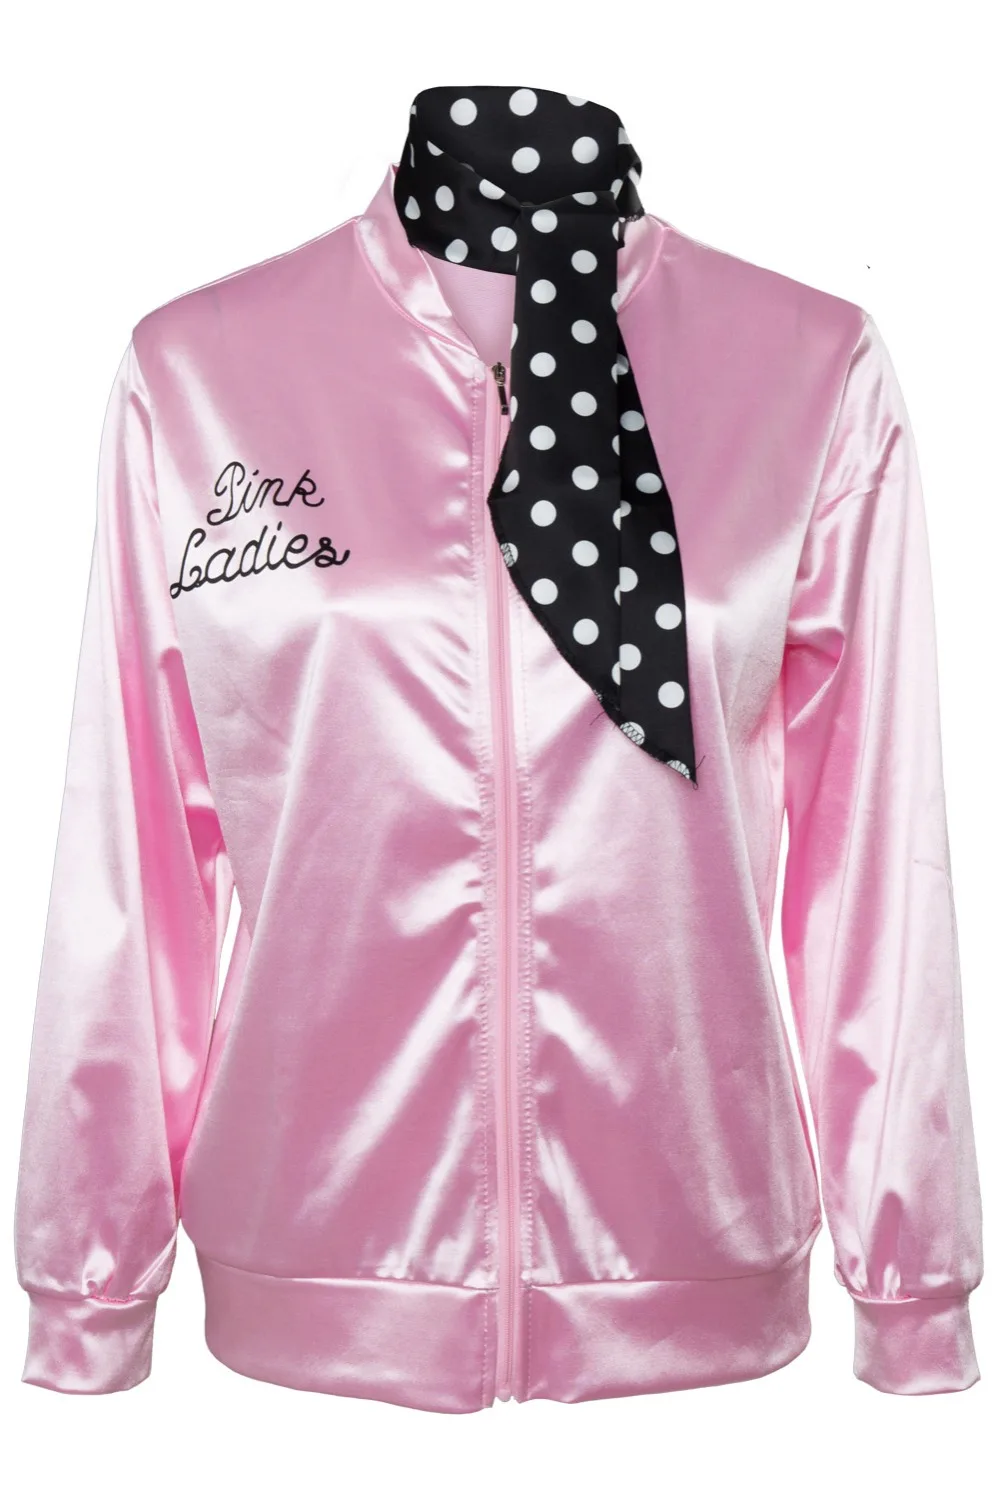 High Quality Grease Costume Adult Women Pink Lady Costume Retro Trench Satin Coat Jacket Halloween Cosplay Cheerleader Clothing